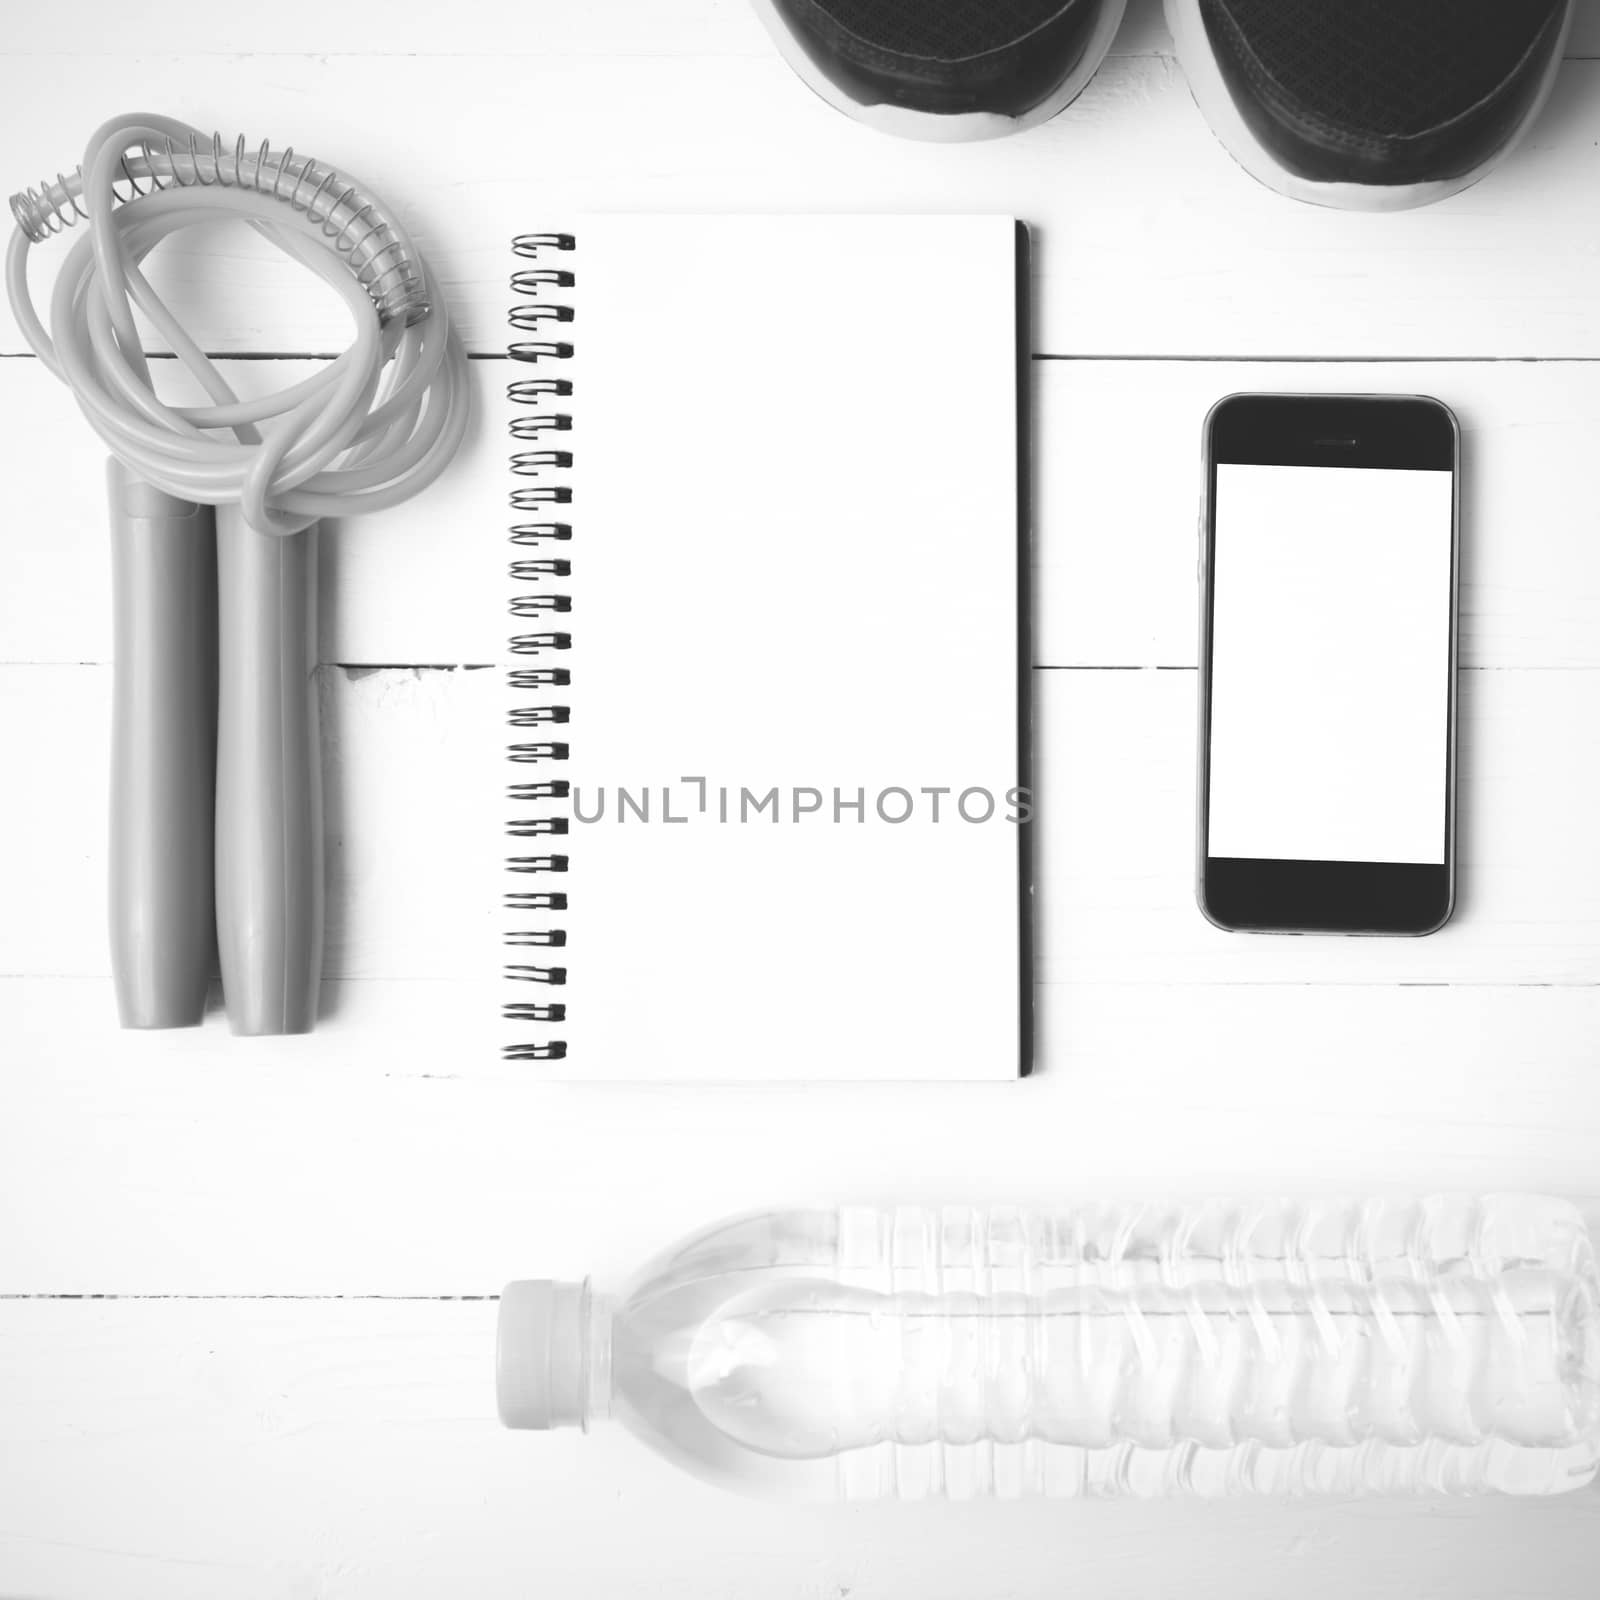 fitness equipment : running shoes,jumping rope,drinking water,notebook and phone on white wood table  black and white tone color style